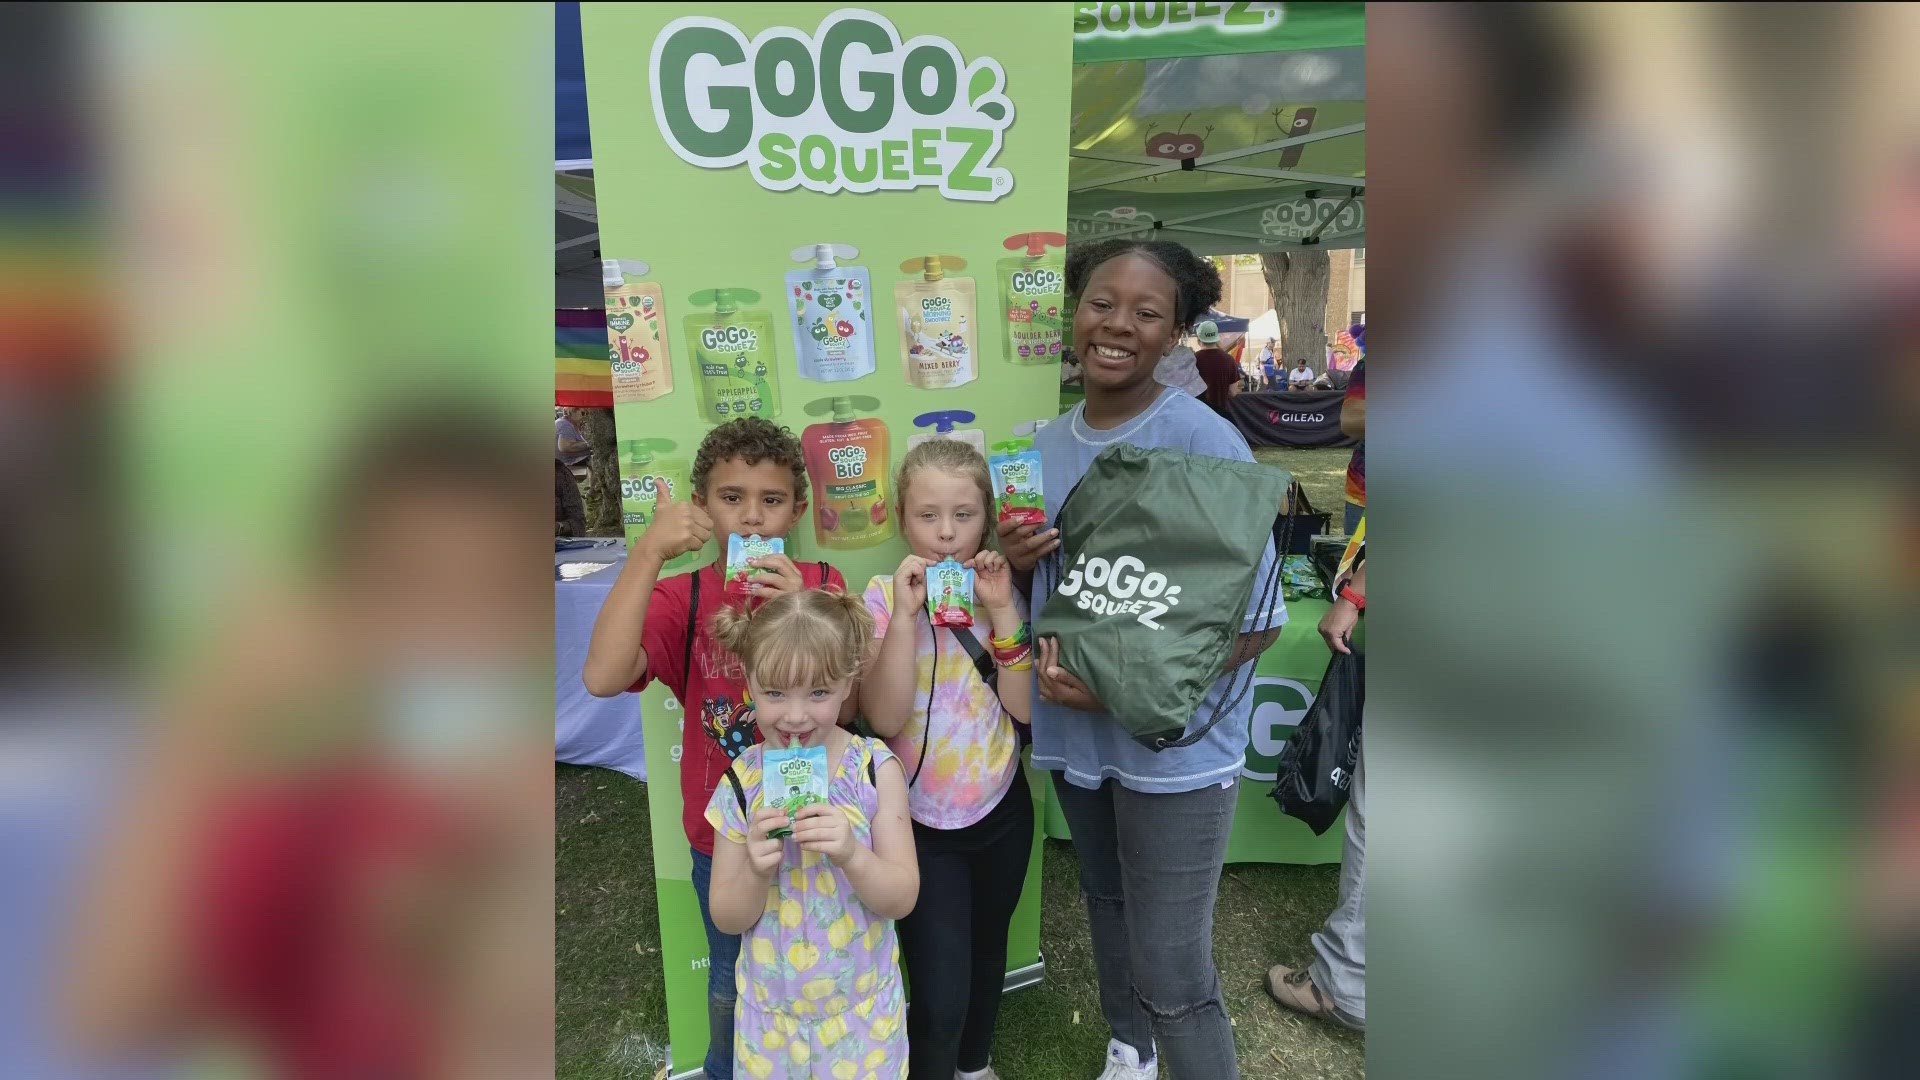 For KTVB's 16th annual 7Cares Idaho Shares campaign, GoGo squeeZ is showing support for Idahoans in need as a featured Company that Cares.